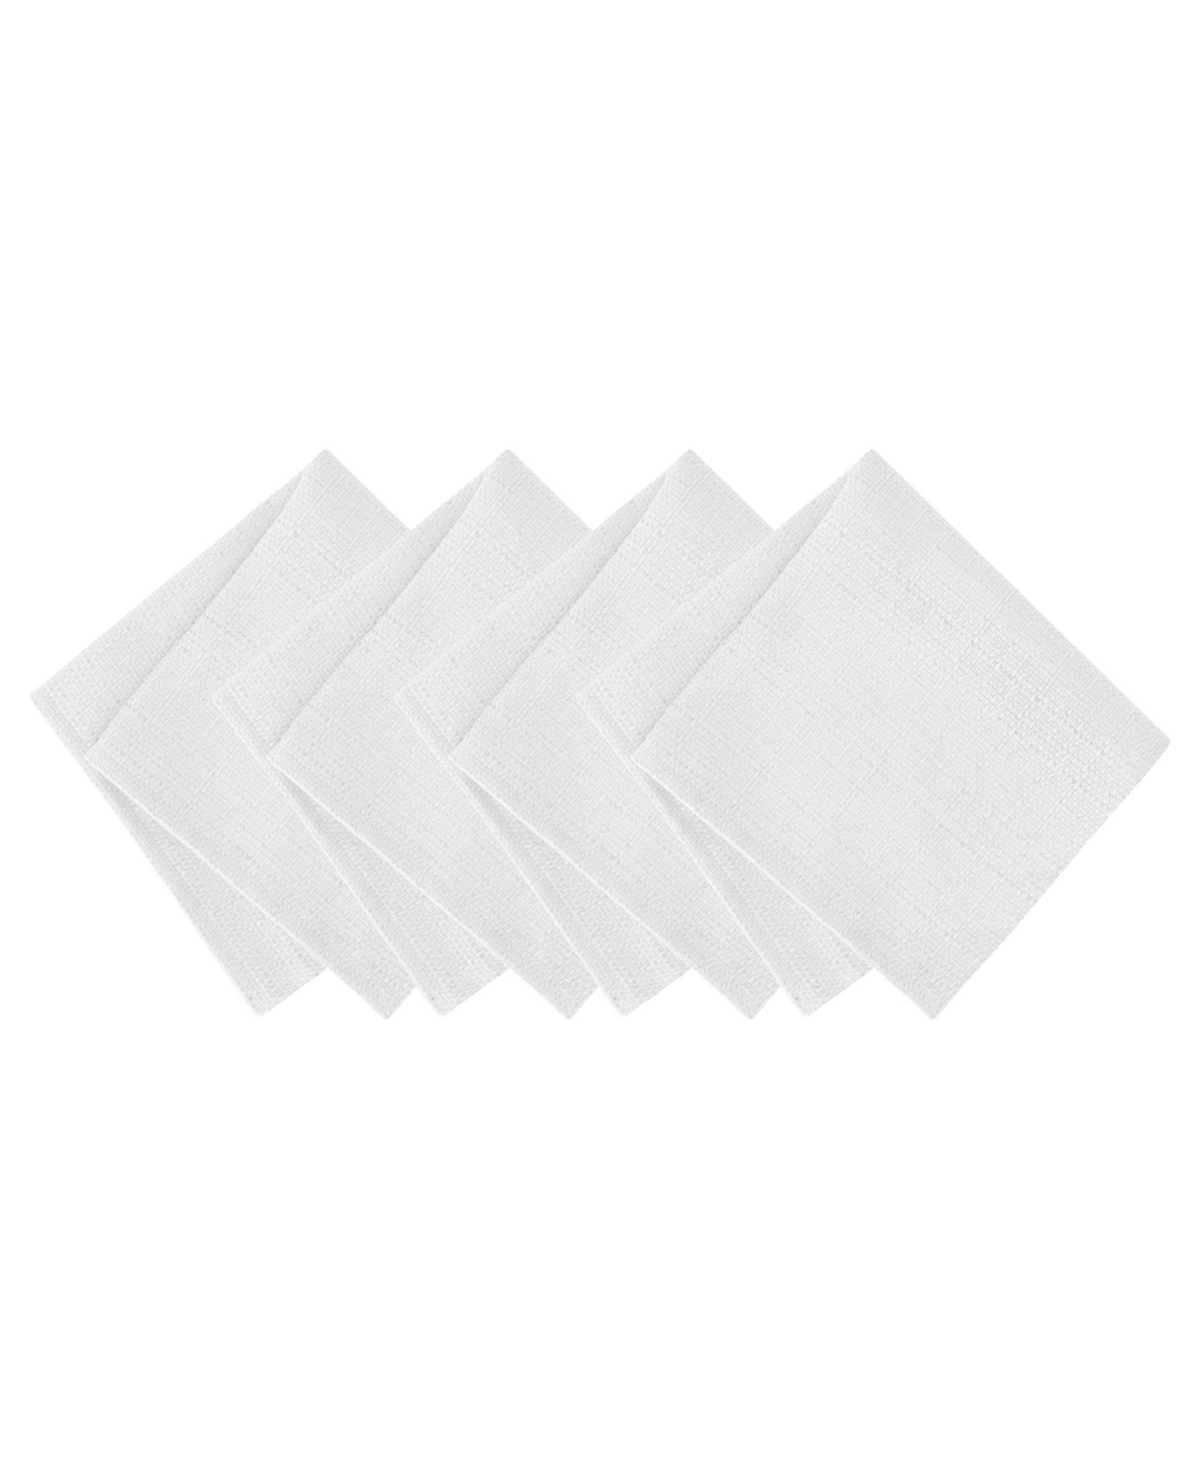 ELRENE LAUREL SOLID TEXTURE WATER AND STAIN RESISTANT NAPKINS, SET OF 4